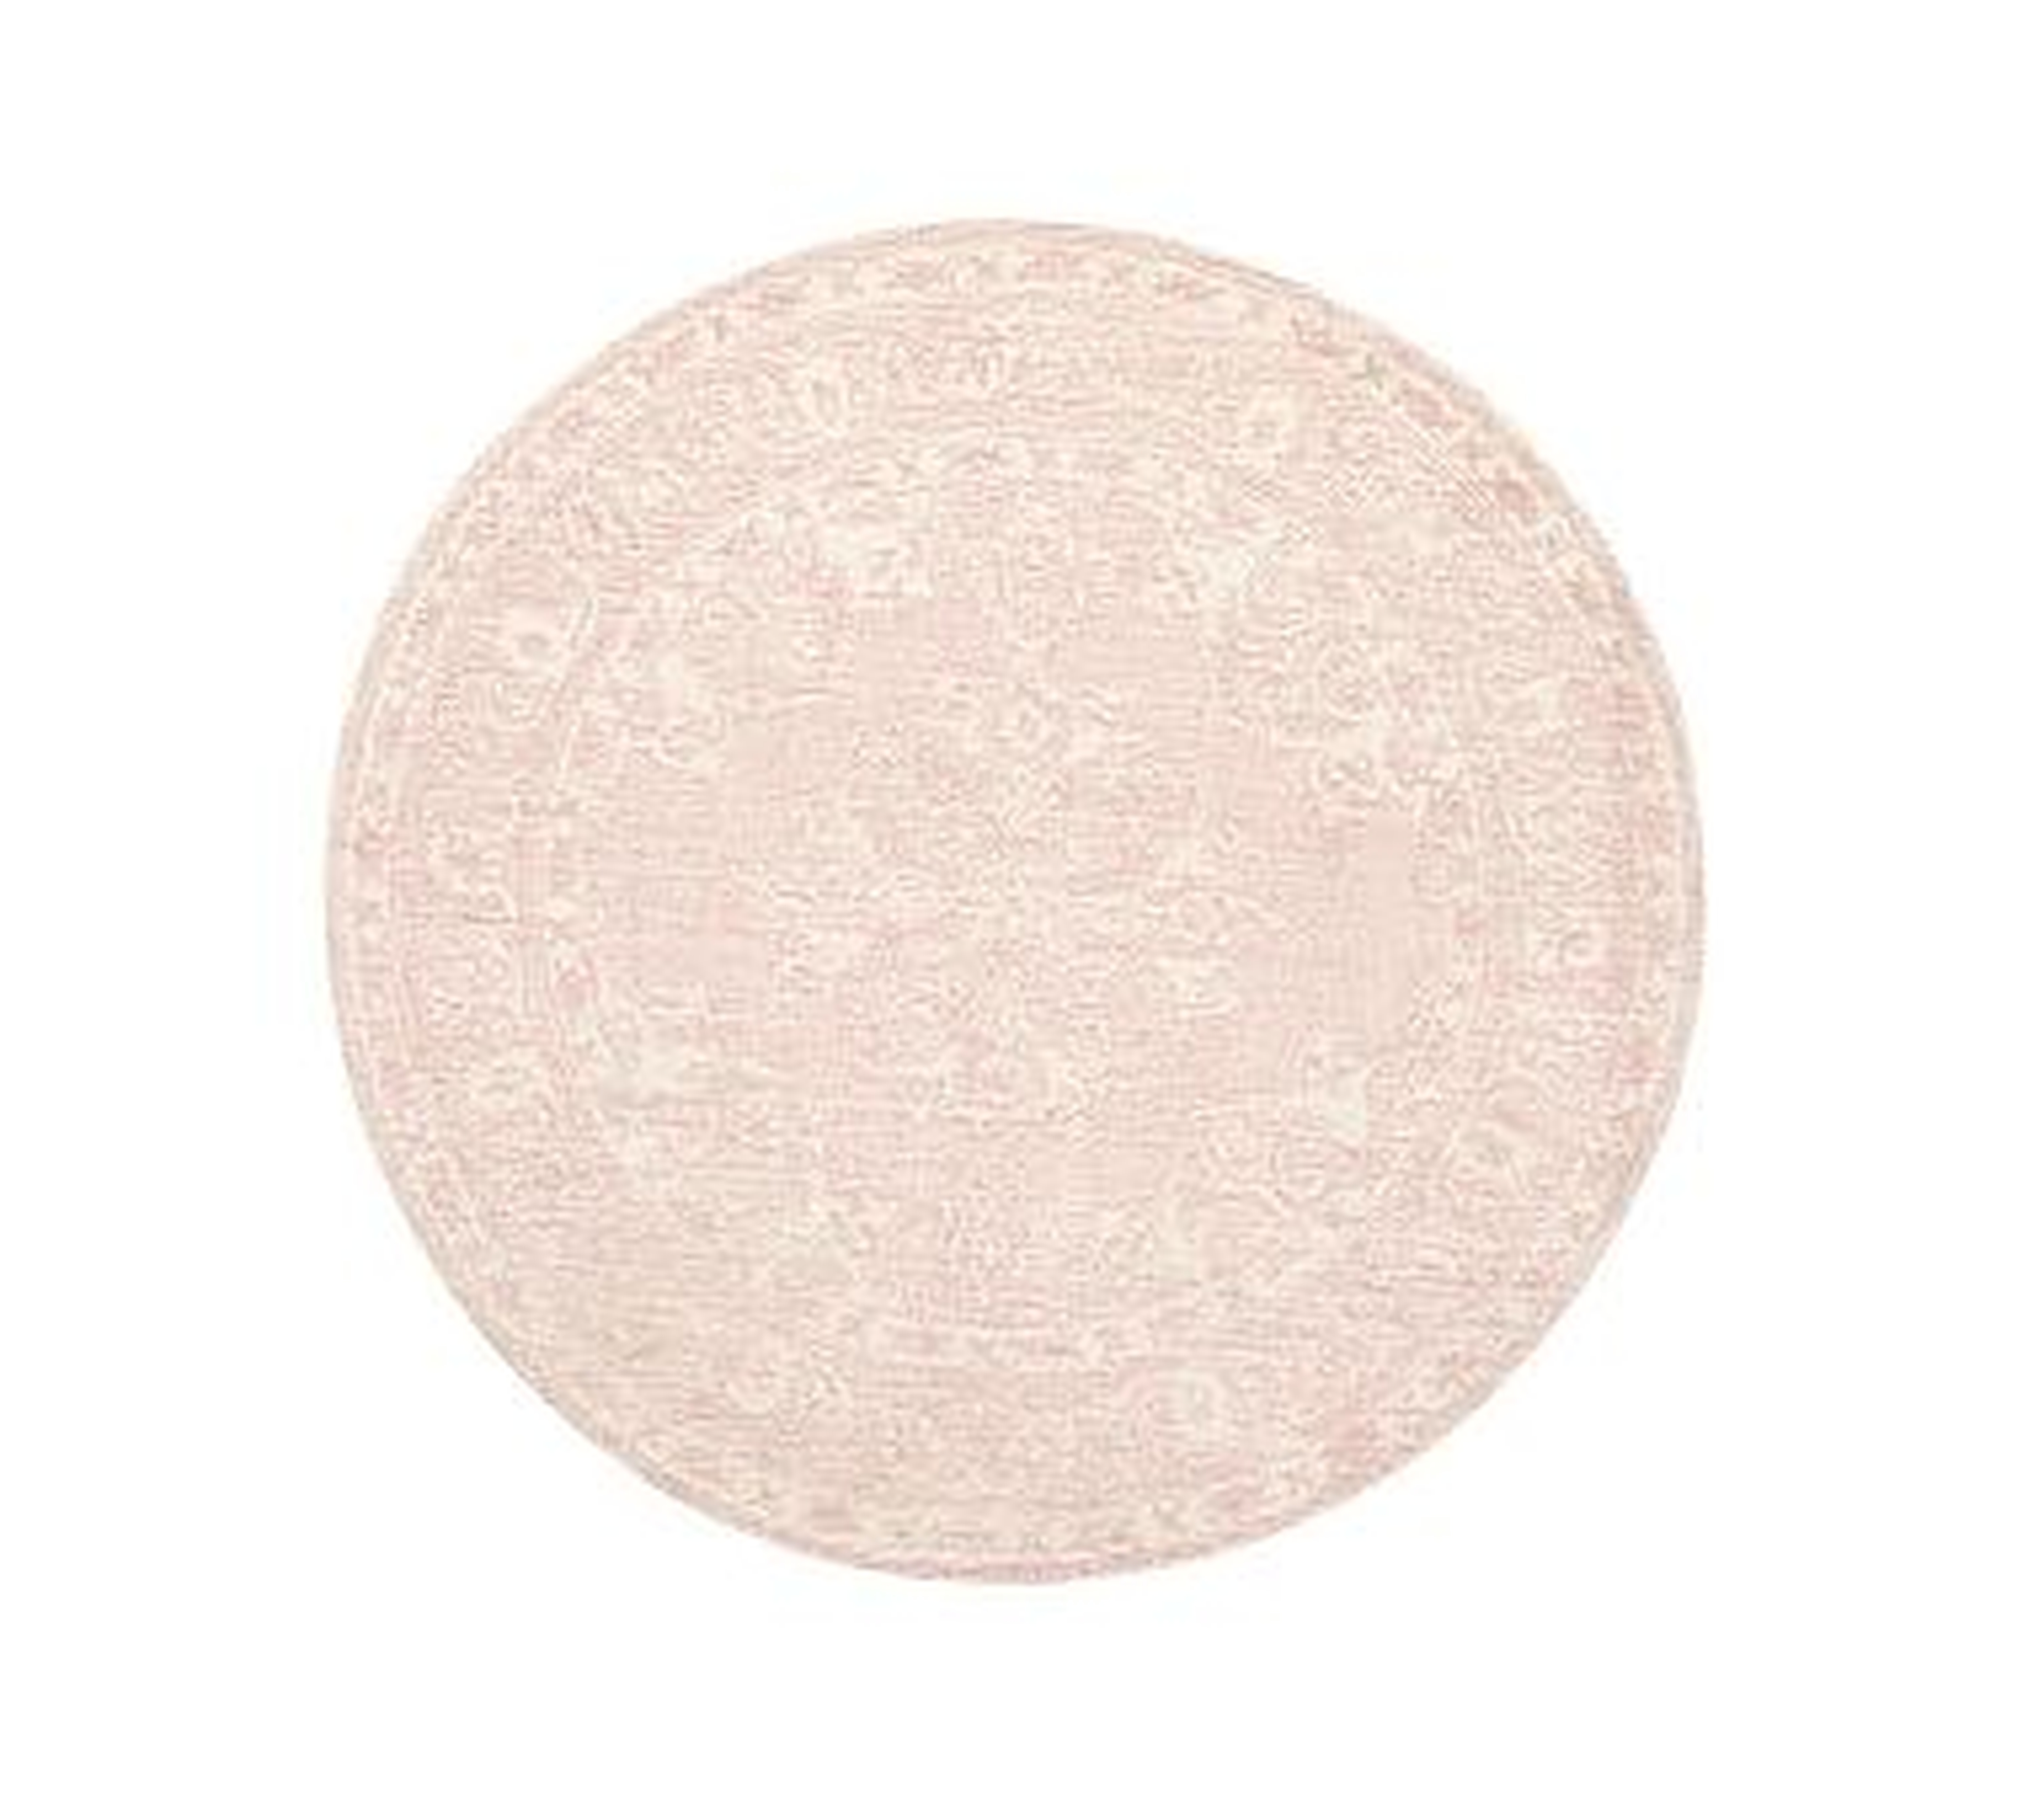 Astrid Rug, 5' Round, Dusty Rose - Pottery Barn Kids